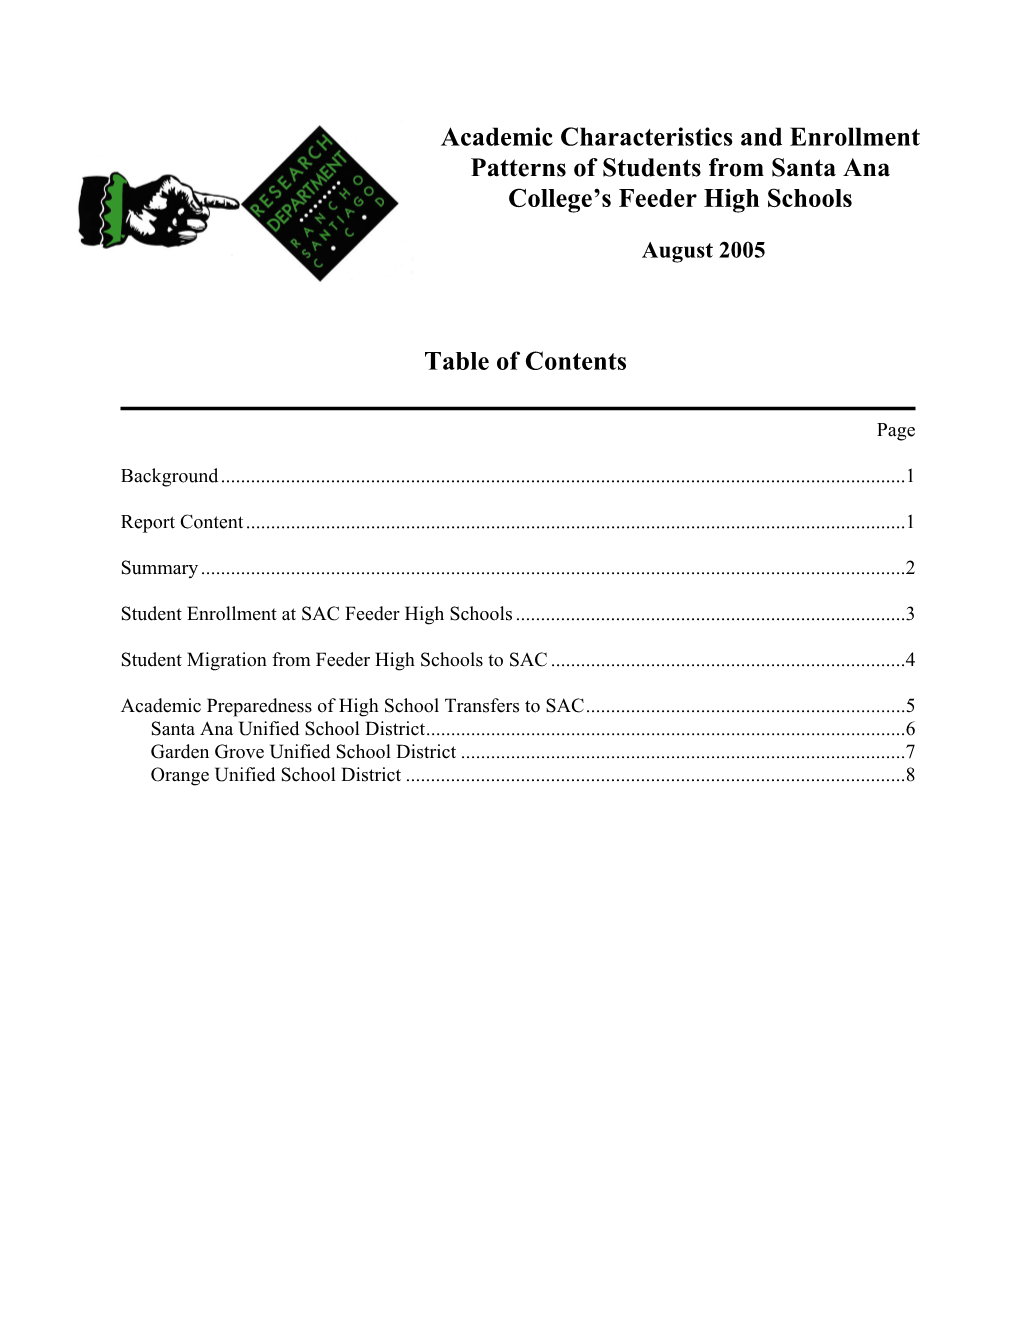 Academic Characteristics and Enrollment Patterns of Students from Santa Ana College’S Feeder High Schools